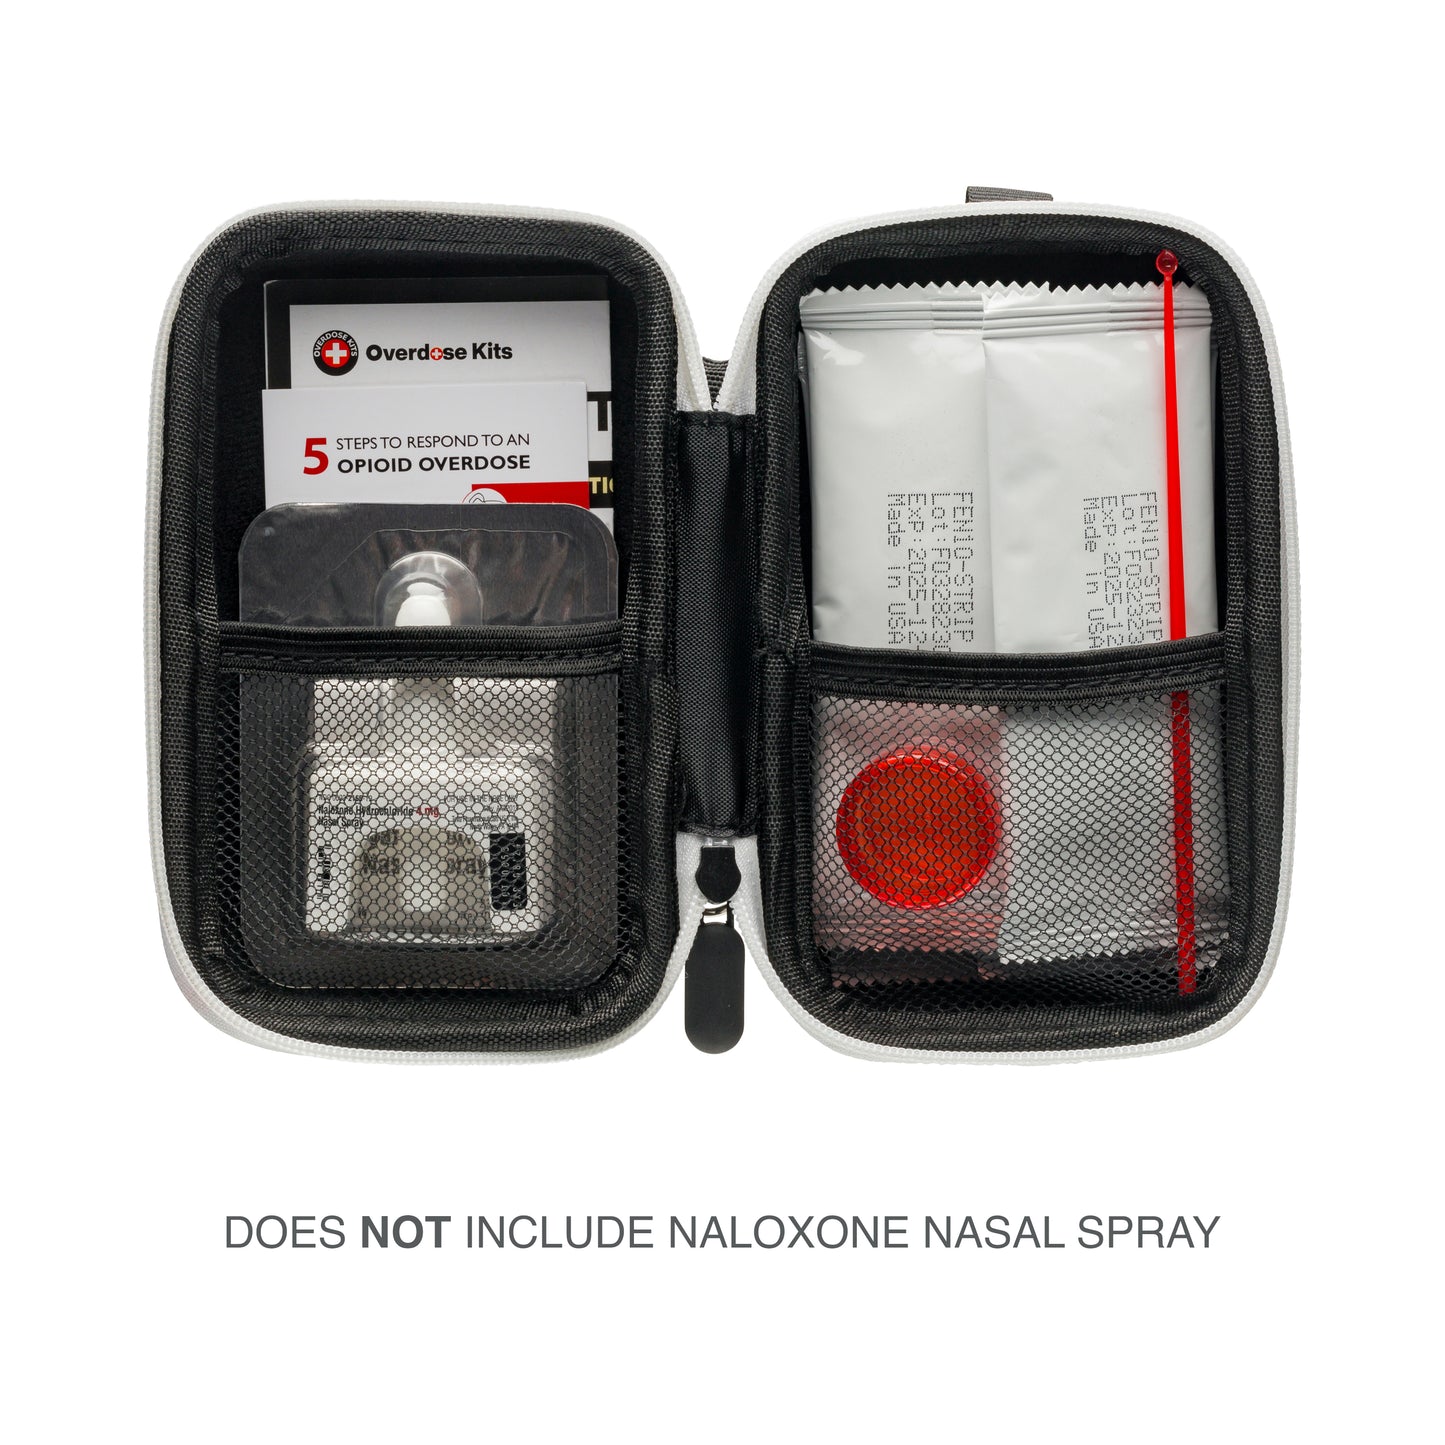 Fentanyl Test Strip Opioid Overdose Prevention Kit - Includes 5 Fentanyl Test Strips, Hardshell Case, Mixing Container, 10mg Spoon and Instructions